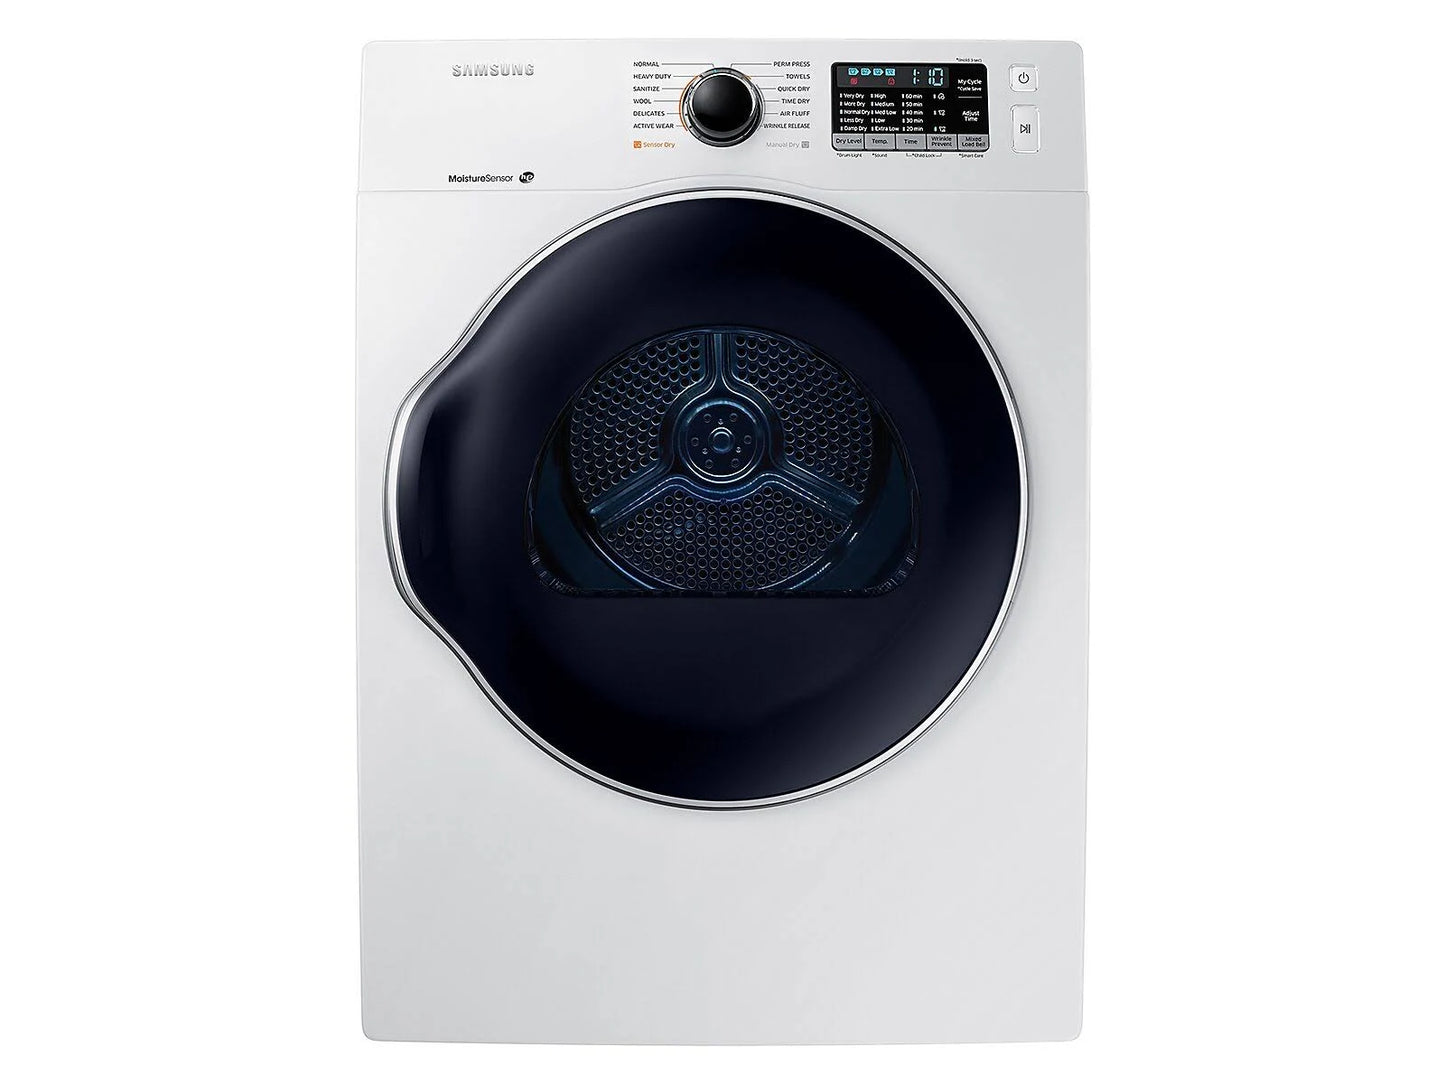 Samsung 4.0 cu. ft. Capacity Electric Dryer with Sensor Dry